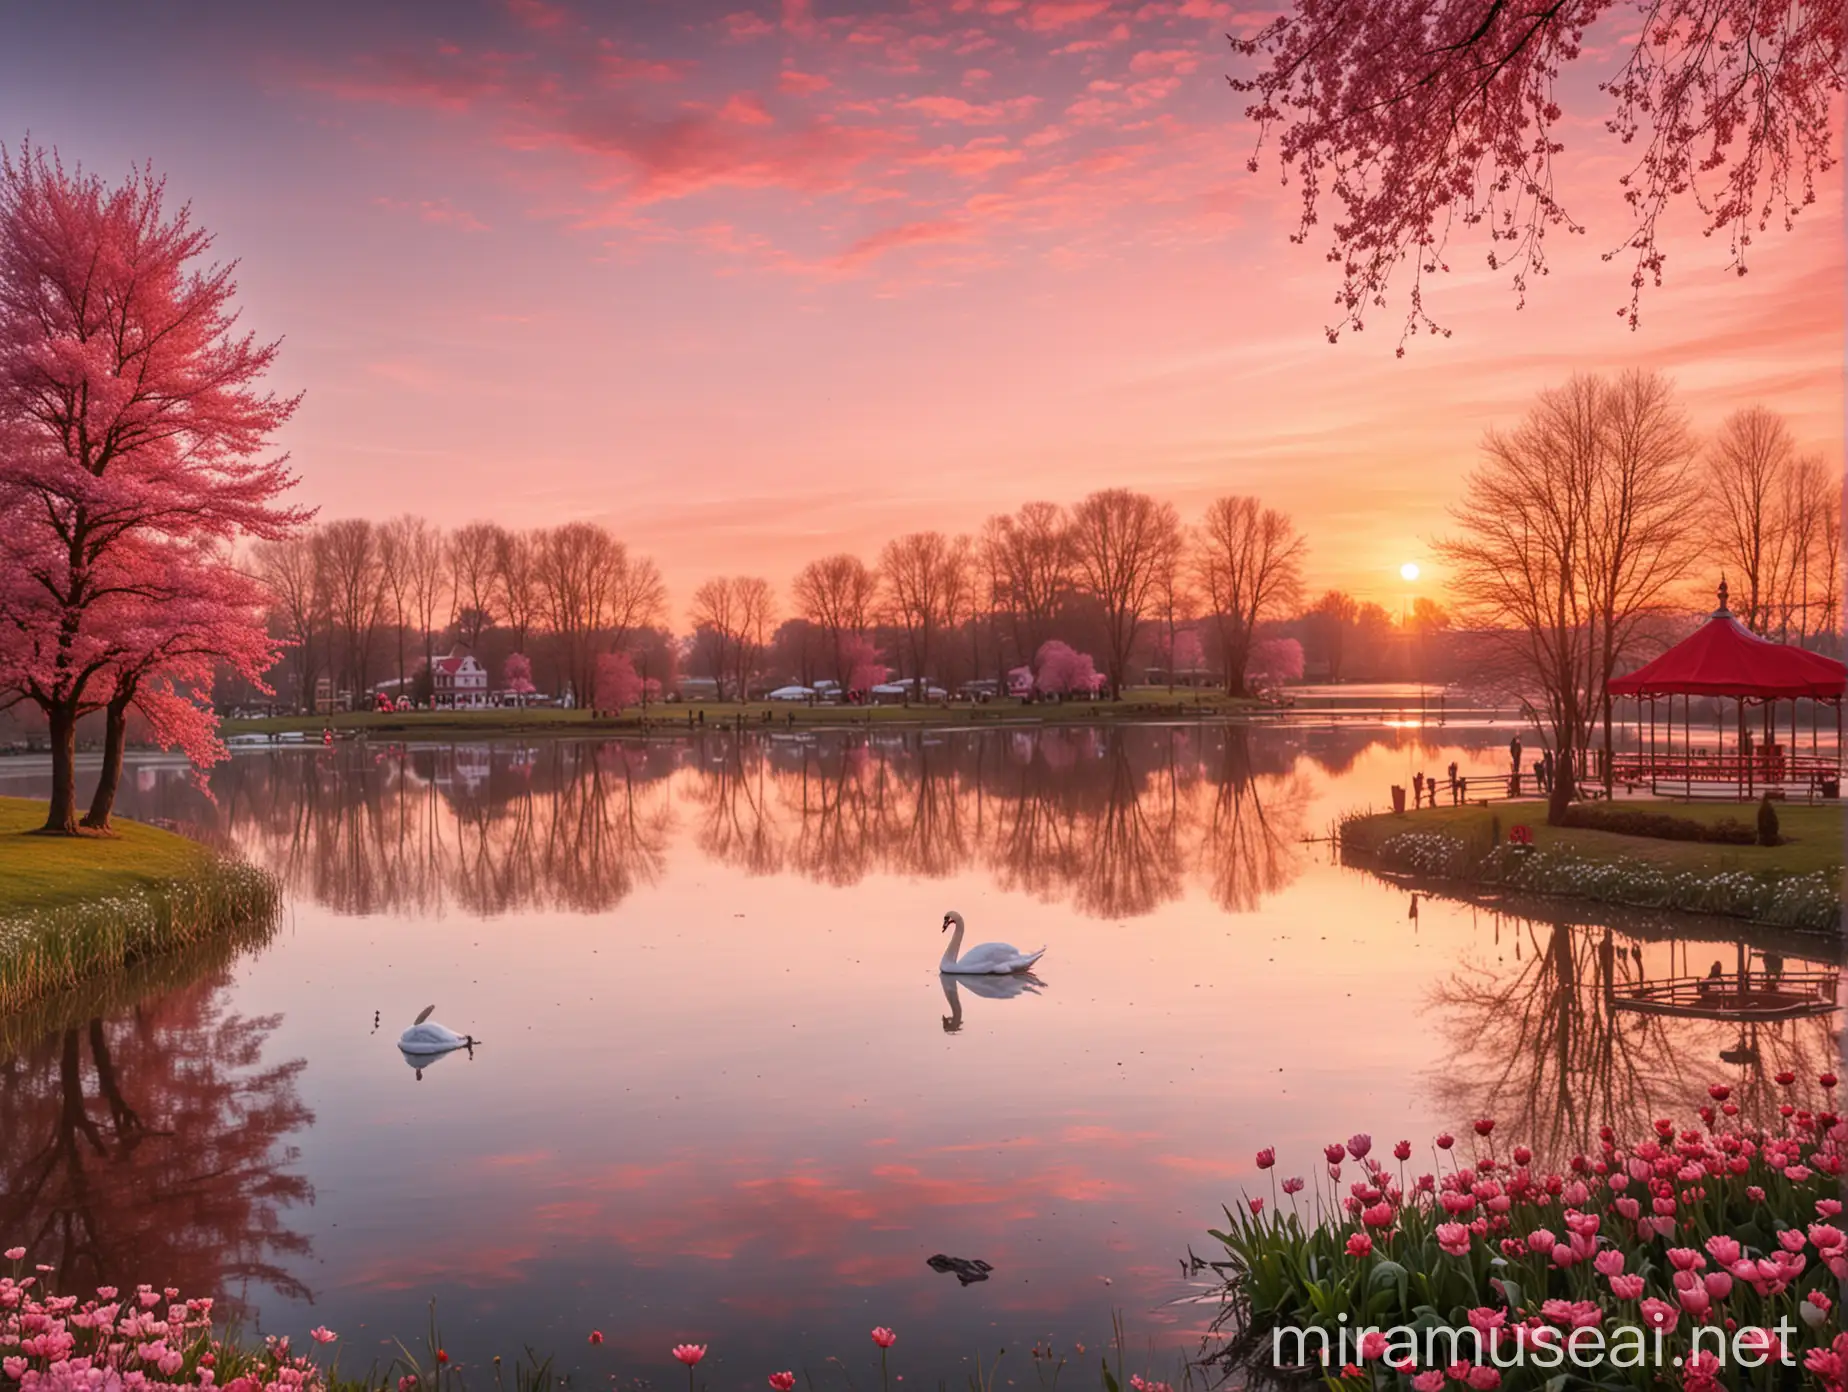 spring background with pink sunset, a lake with a swan swimming in it and a ballet dancer on the water. on the left side of the picture there is a field where children play on the red merry-go-round 